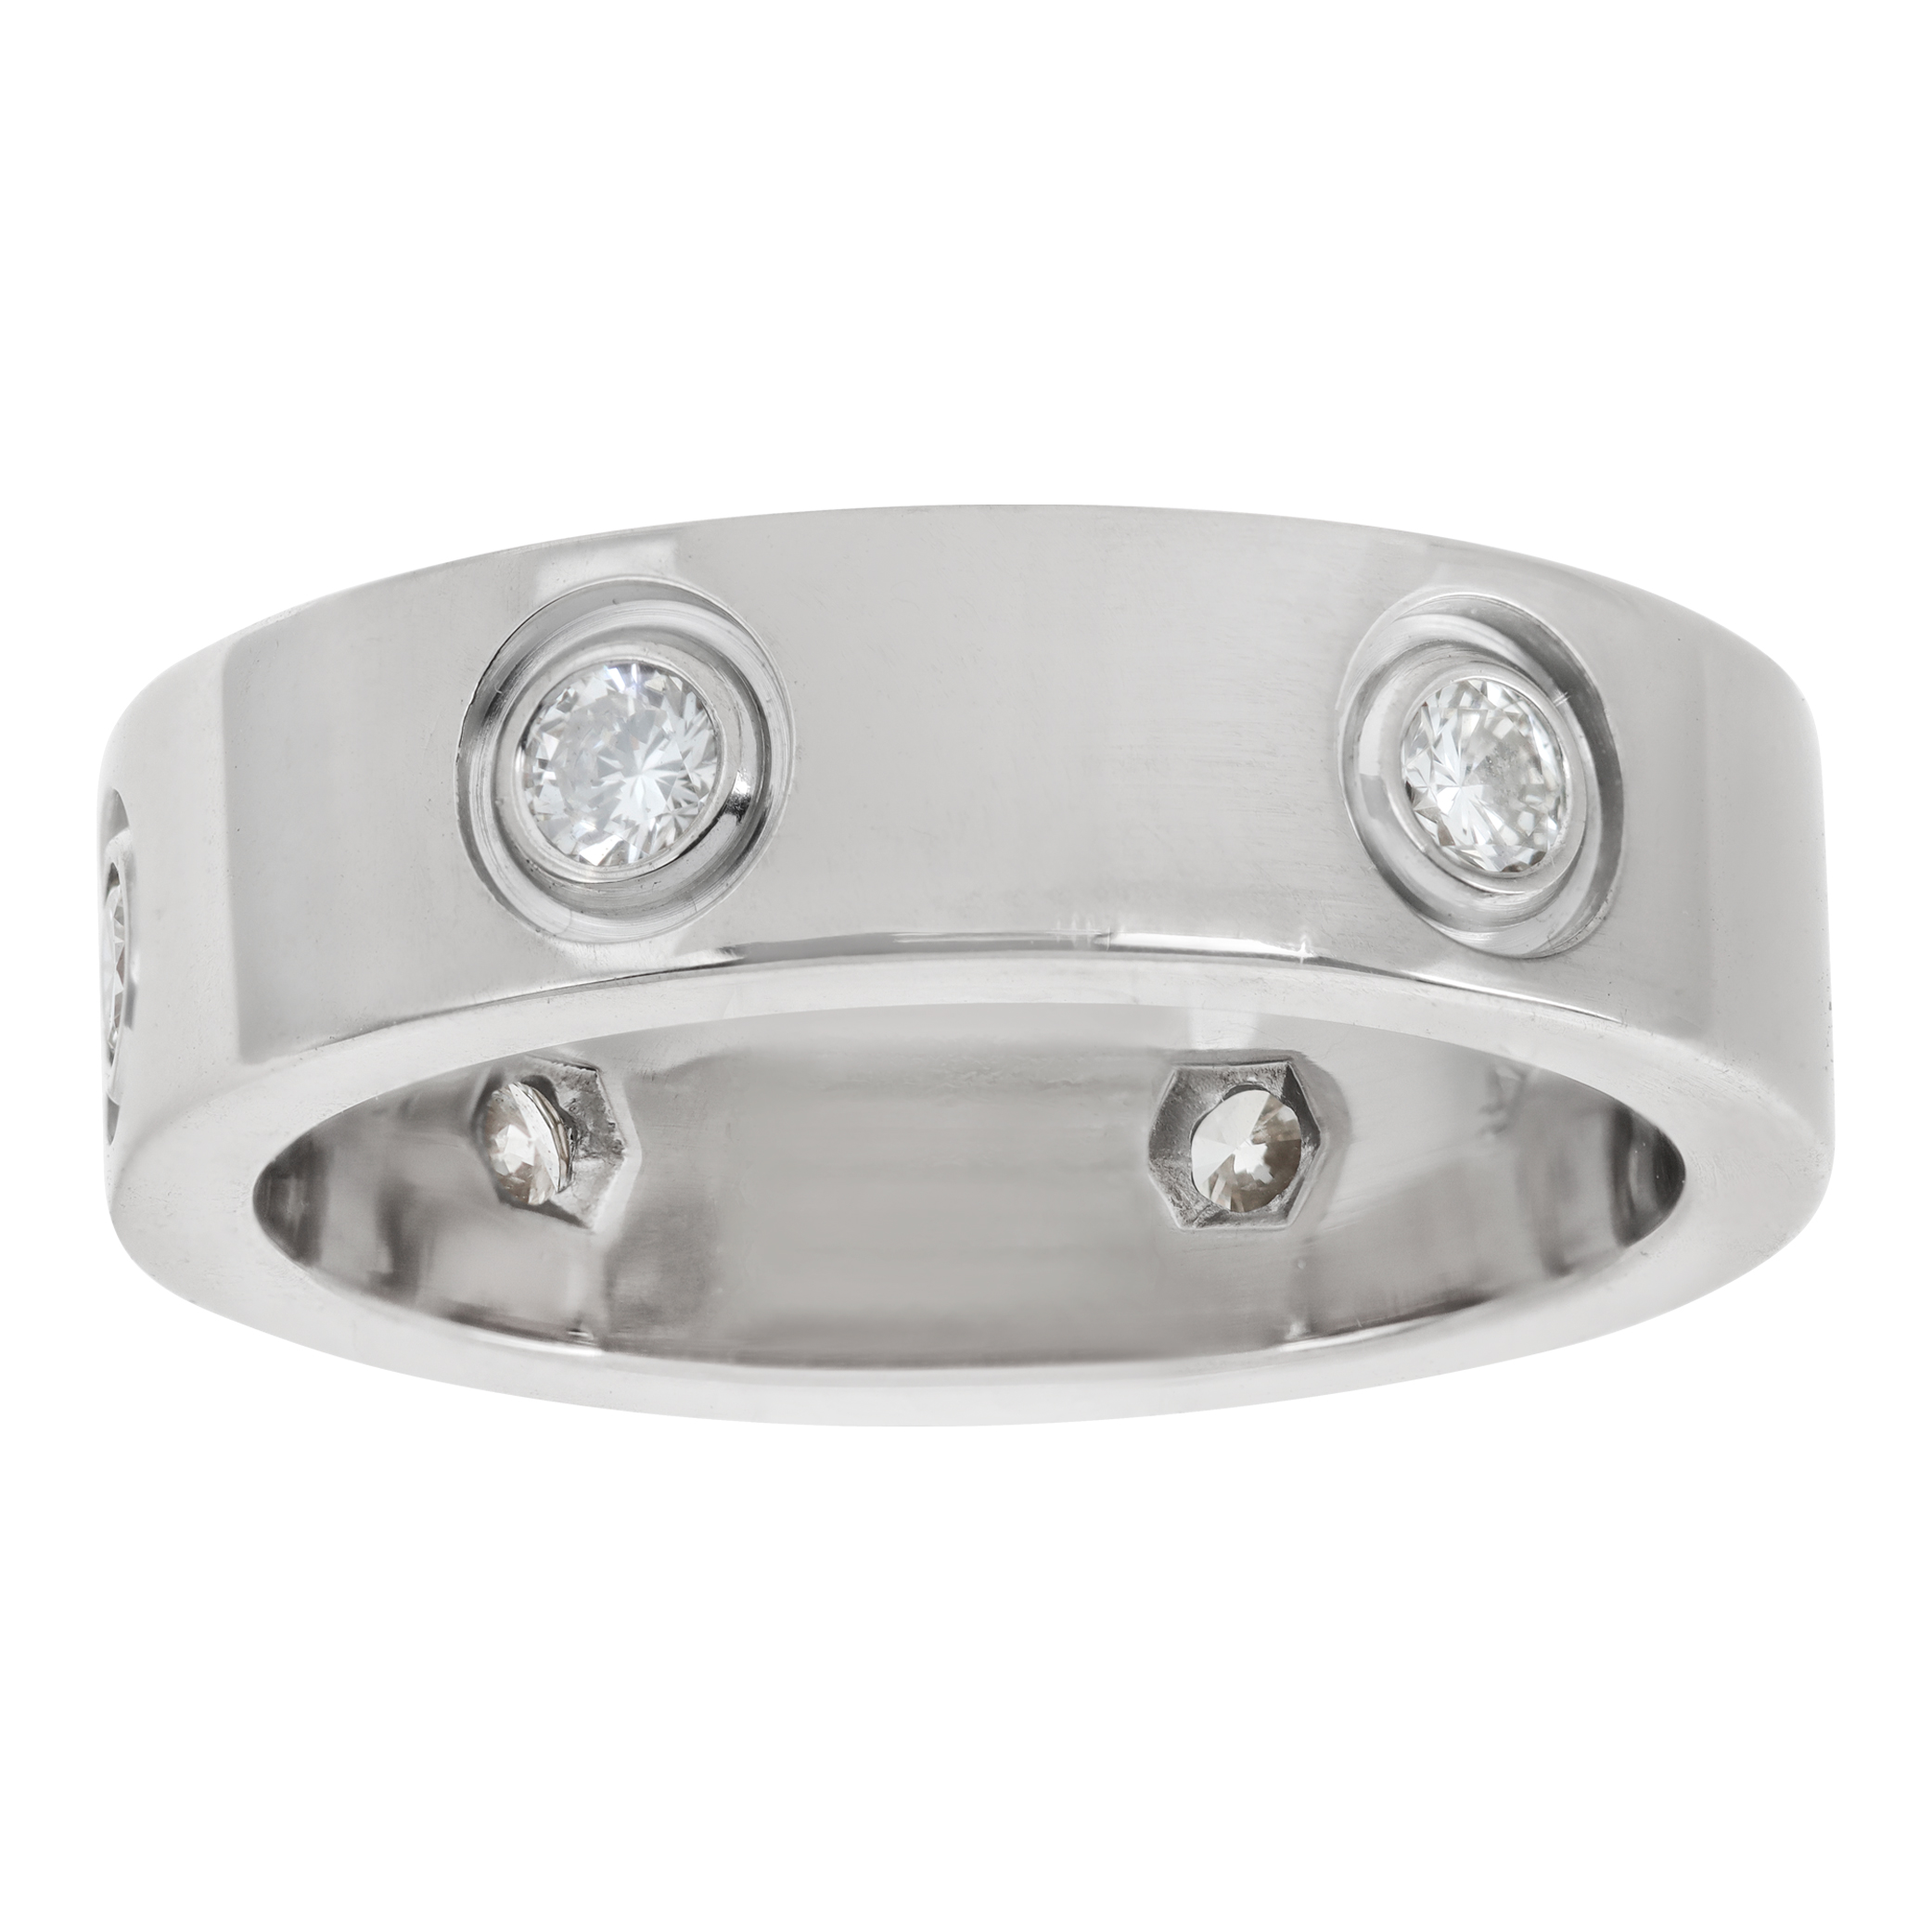 Cartier Love ring in 18k white gold with 6 diamonds, size 51